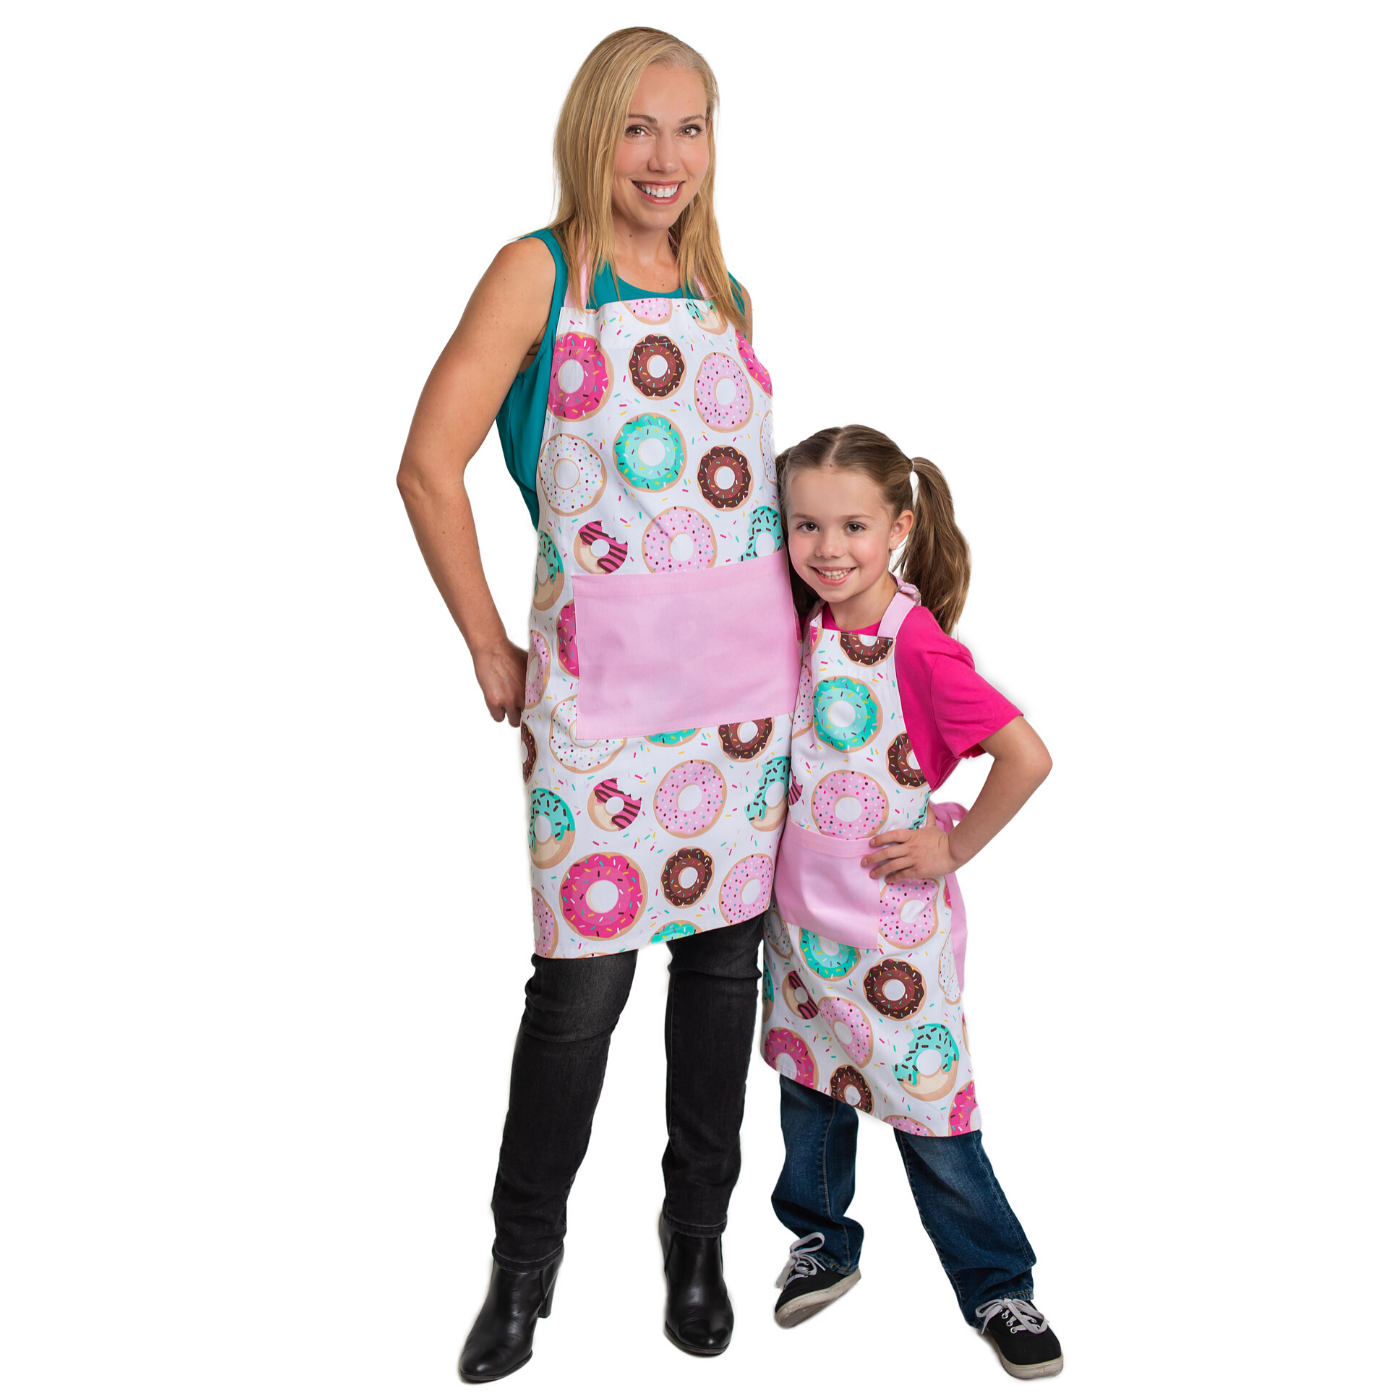 Lifestyle of mother and daughter in Donut Print Adult and Kid Matching Apron Set